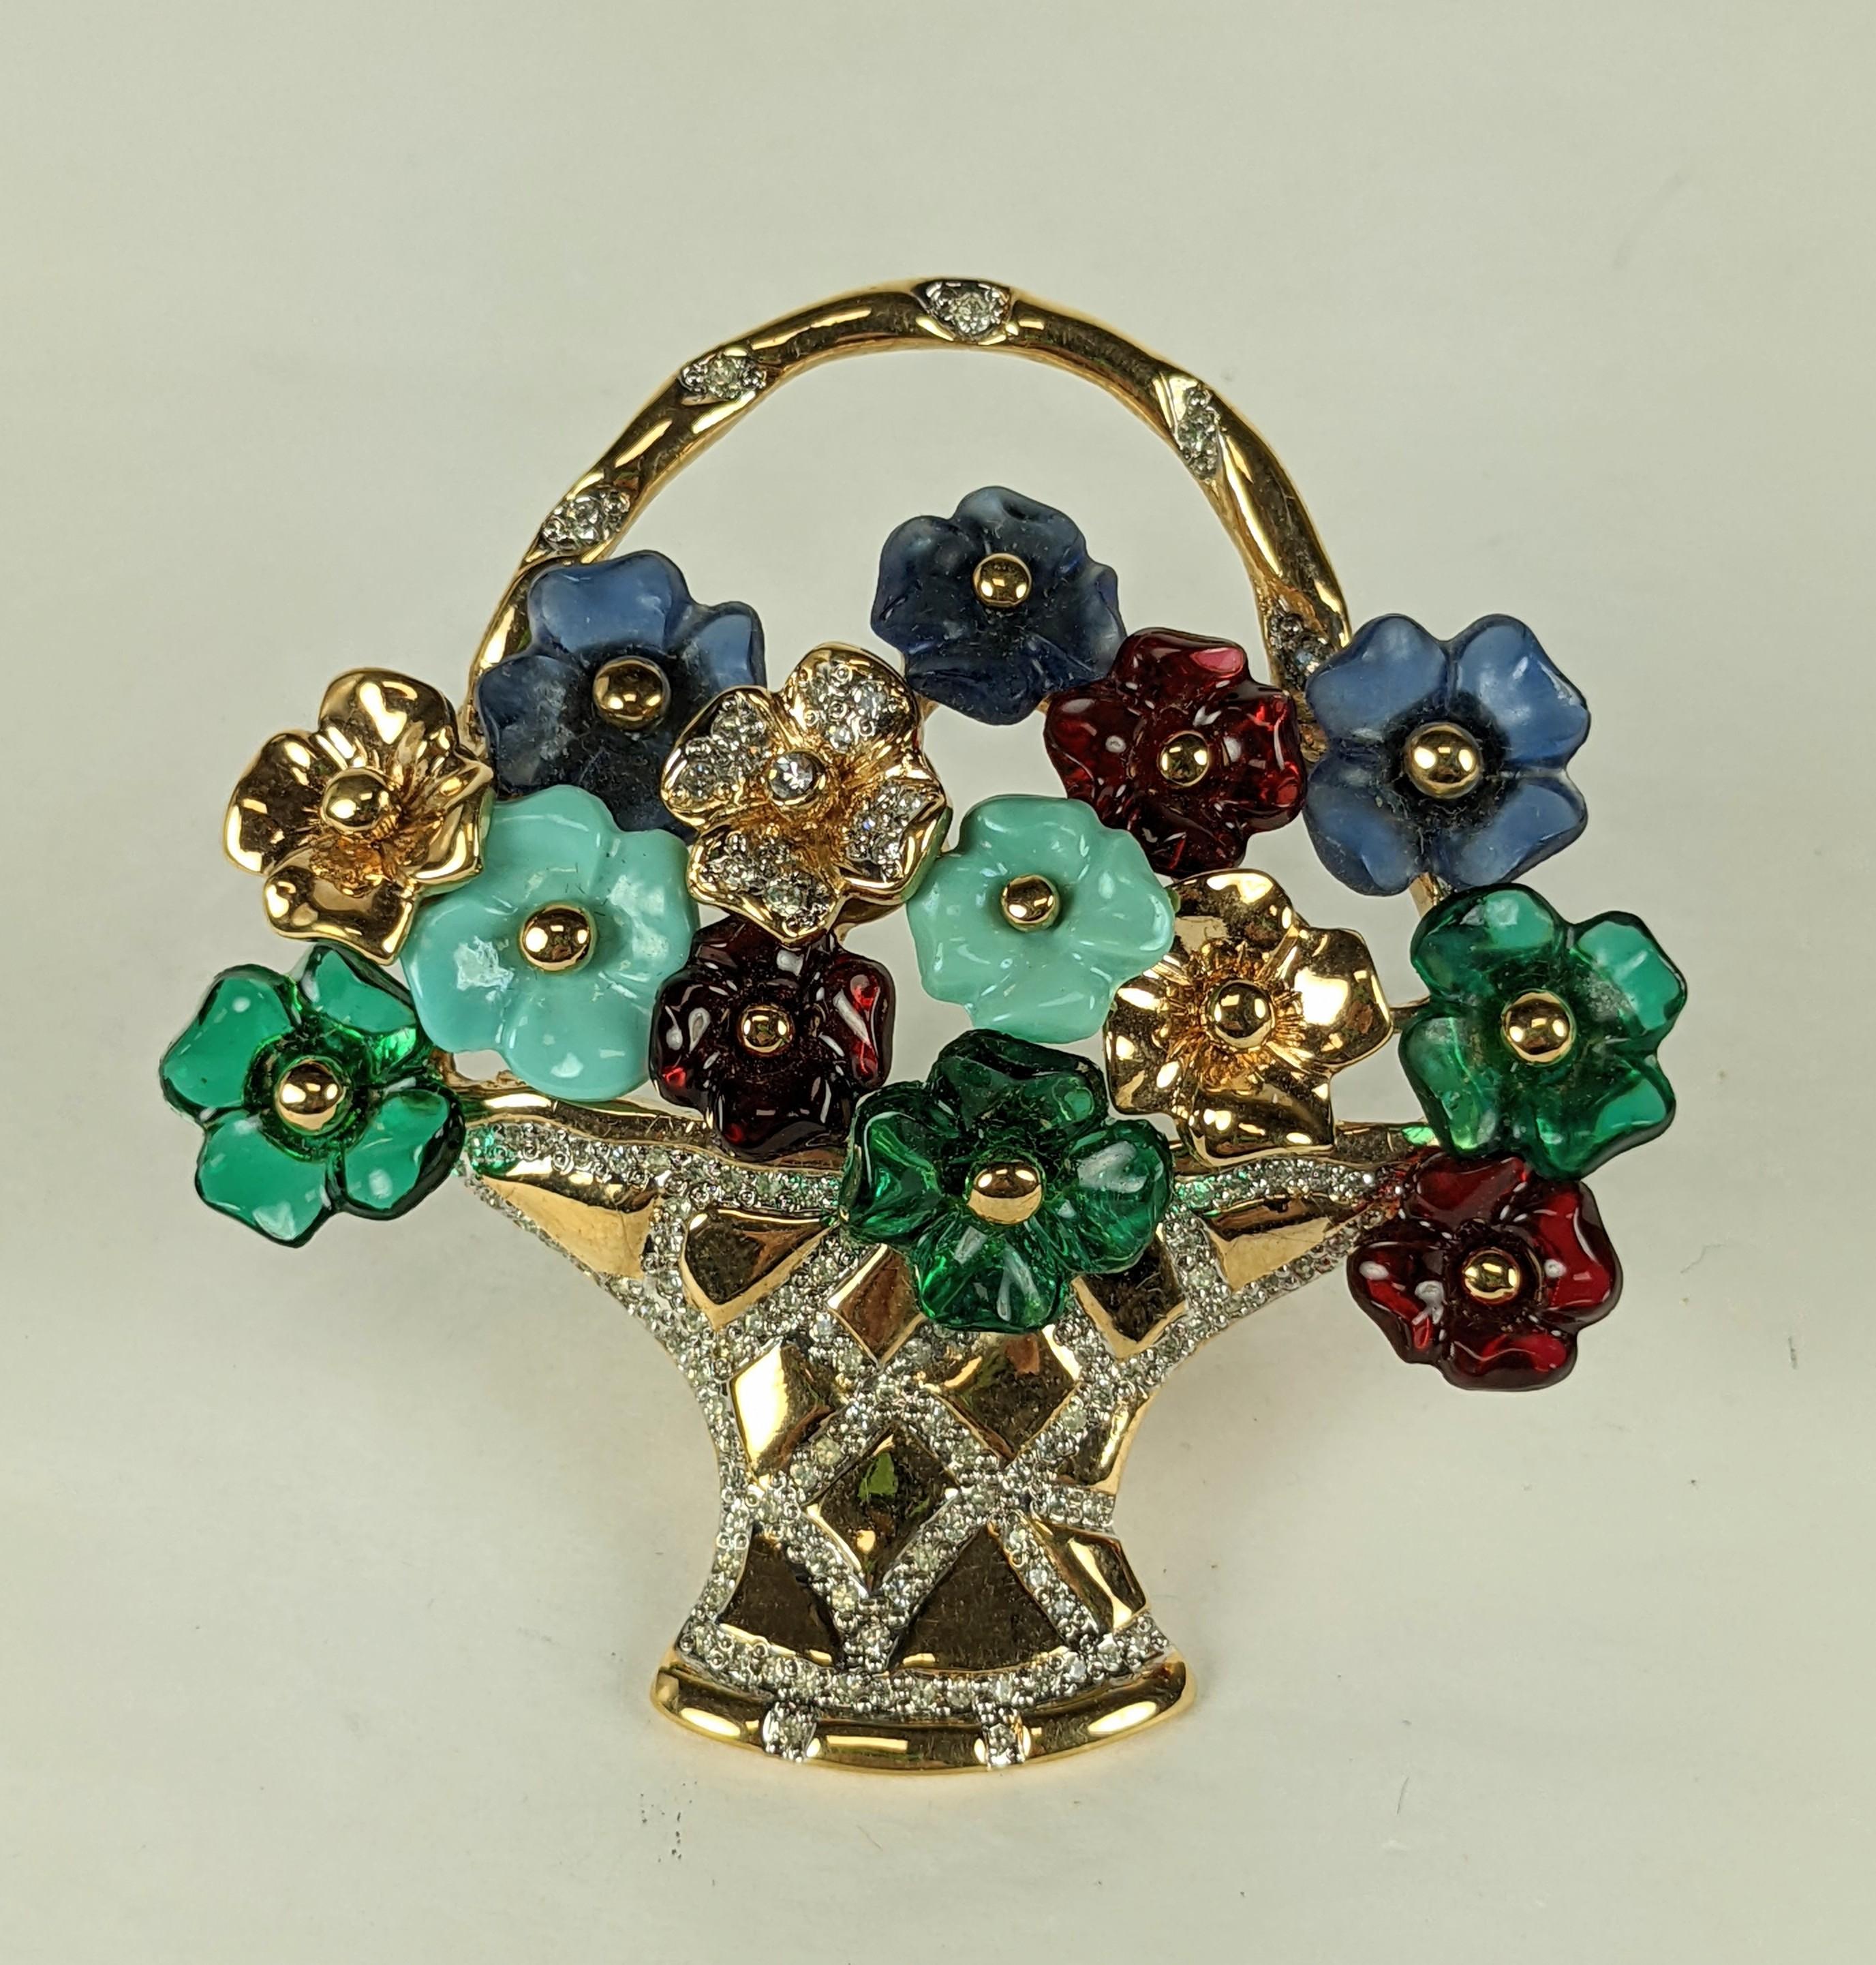 Large Vogue Bijoux Giardinetto Brooch from the 1980's composed of glass flowers in a gilt metal and pave accented basket. Flower basket design, striking large size and quality.
1980's Italy. Signed, 3